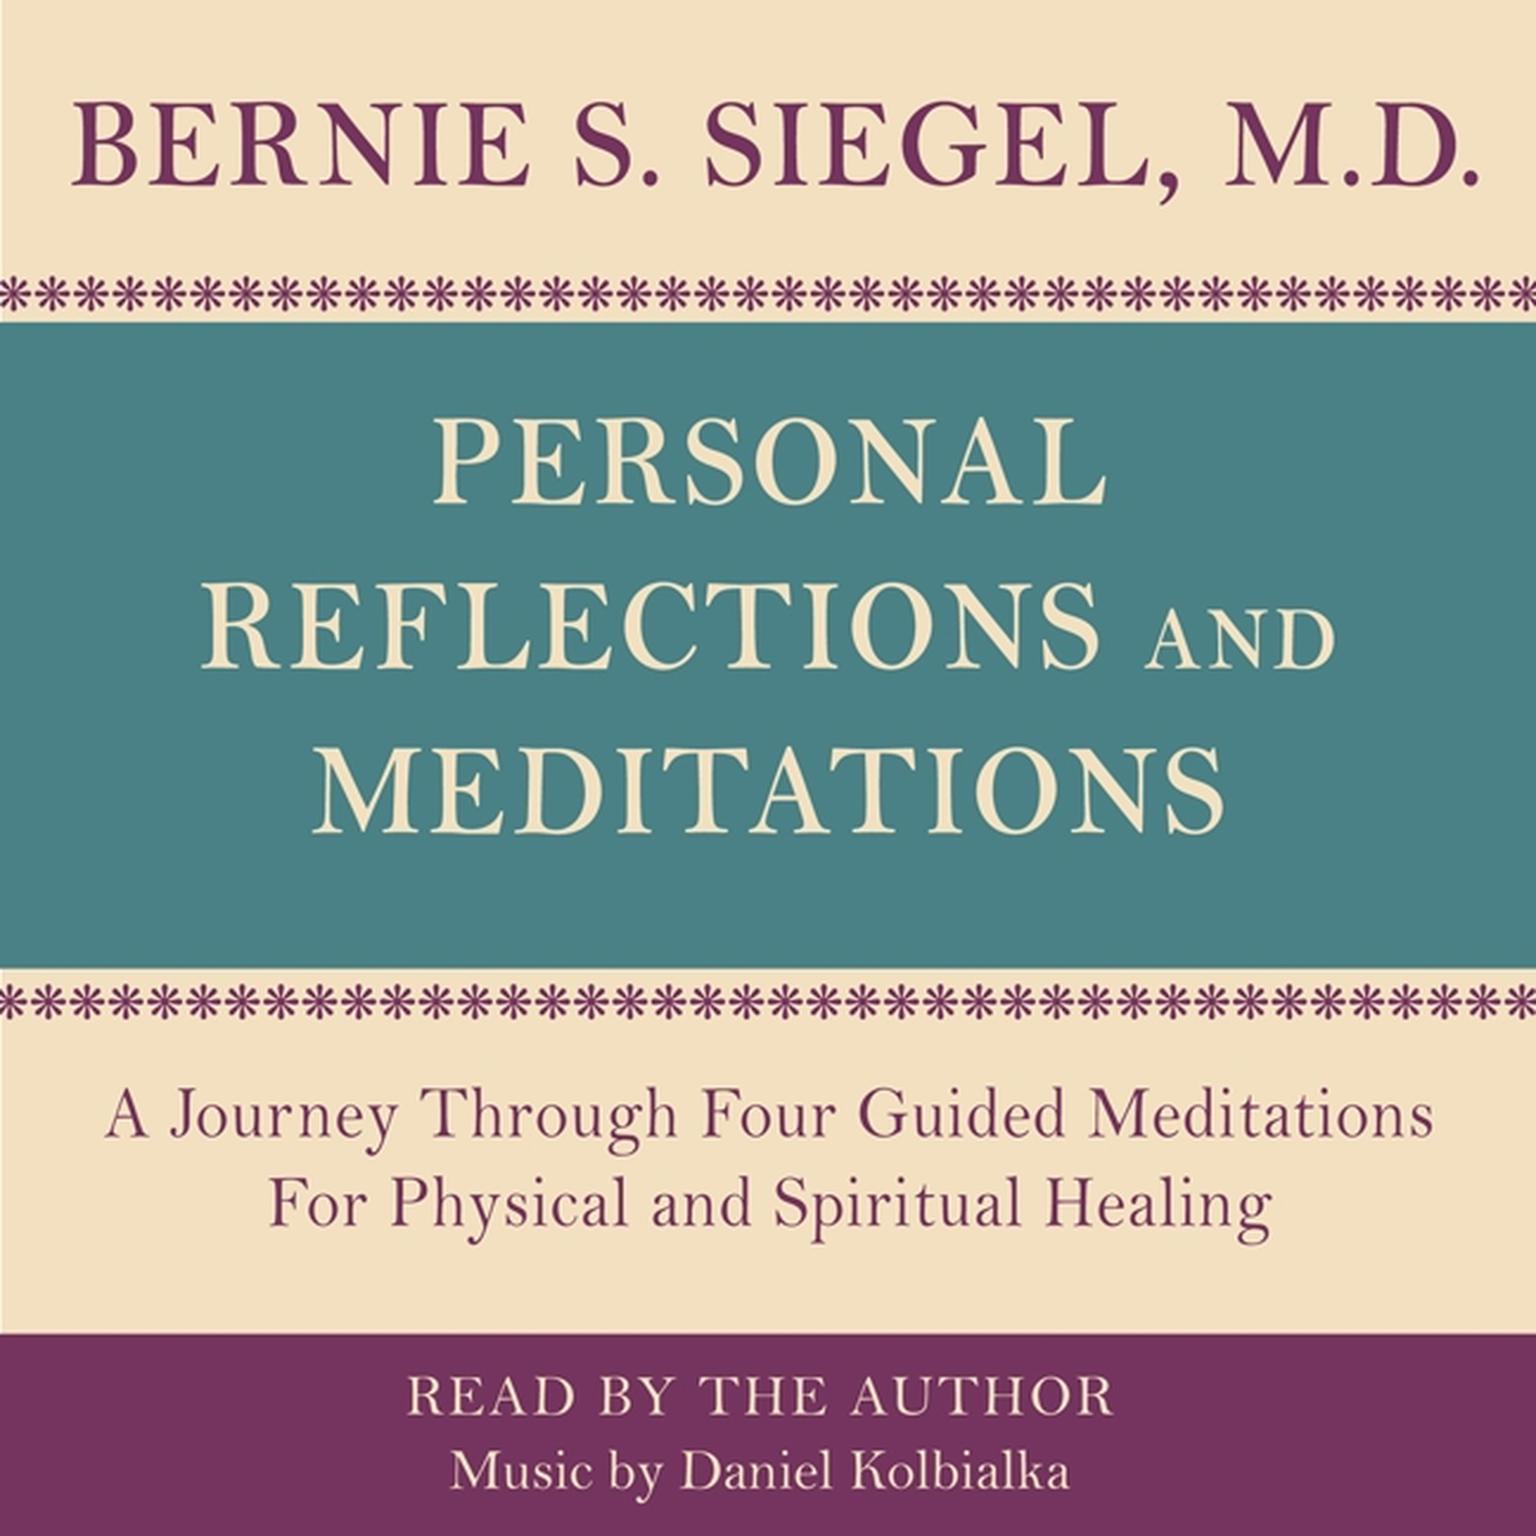 Personal Reflections & Meditations (Abridged): A Journey through Four Guided Meditations for Physical and Spiritual Healing Audiobook, by Bernie Siegel